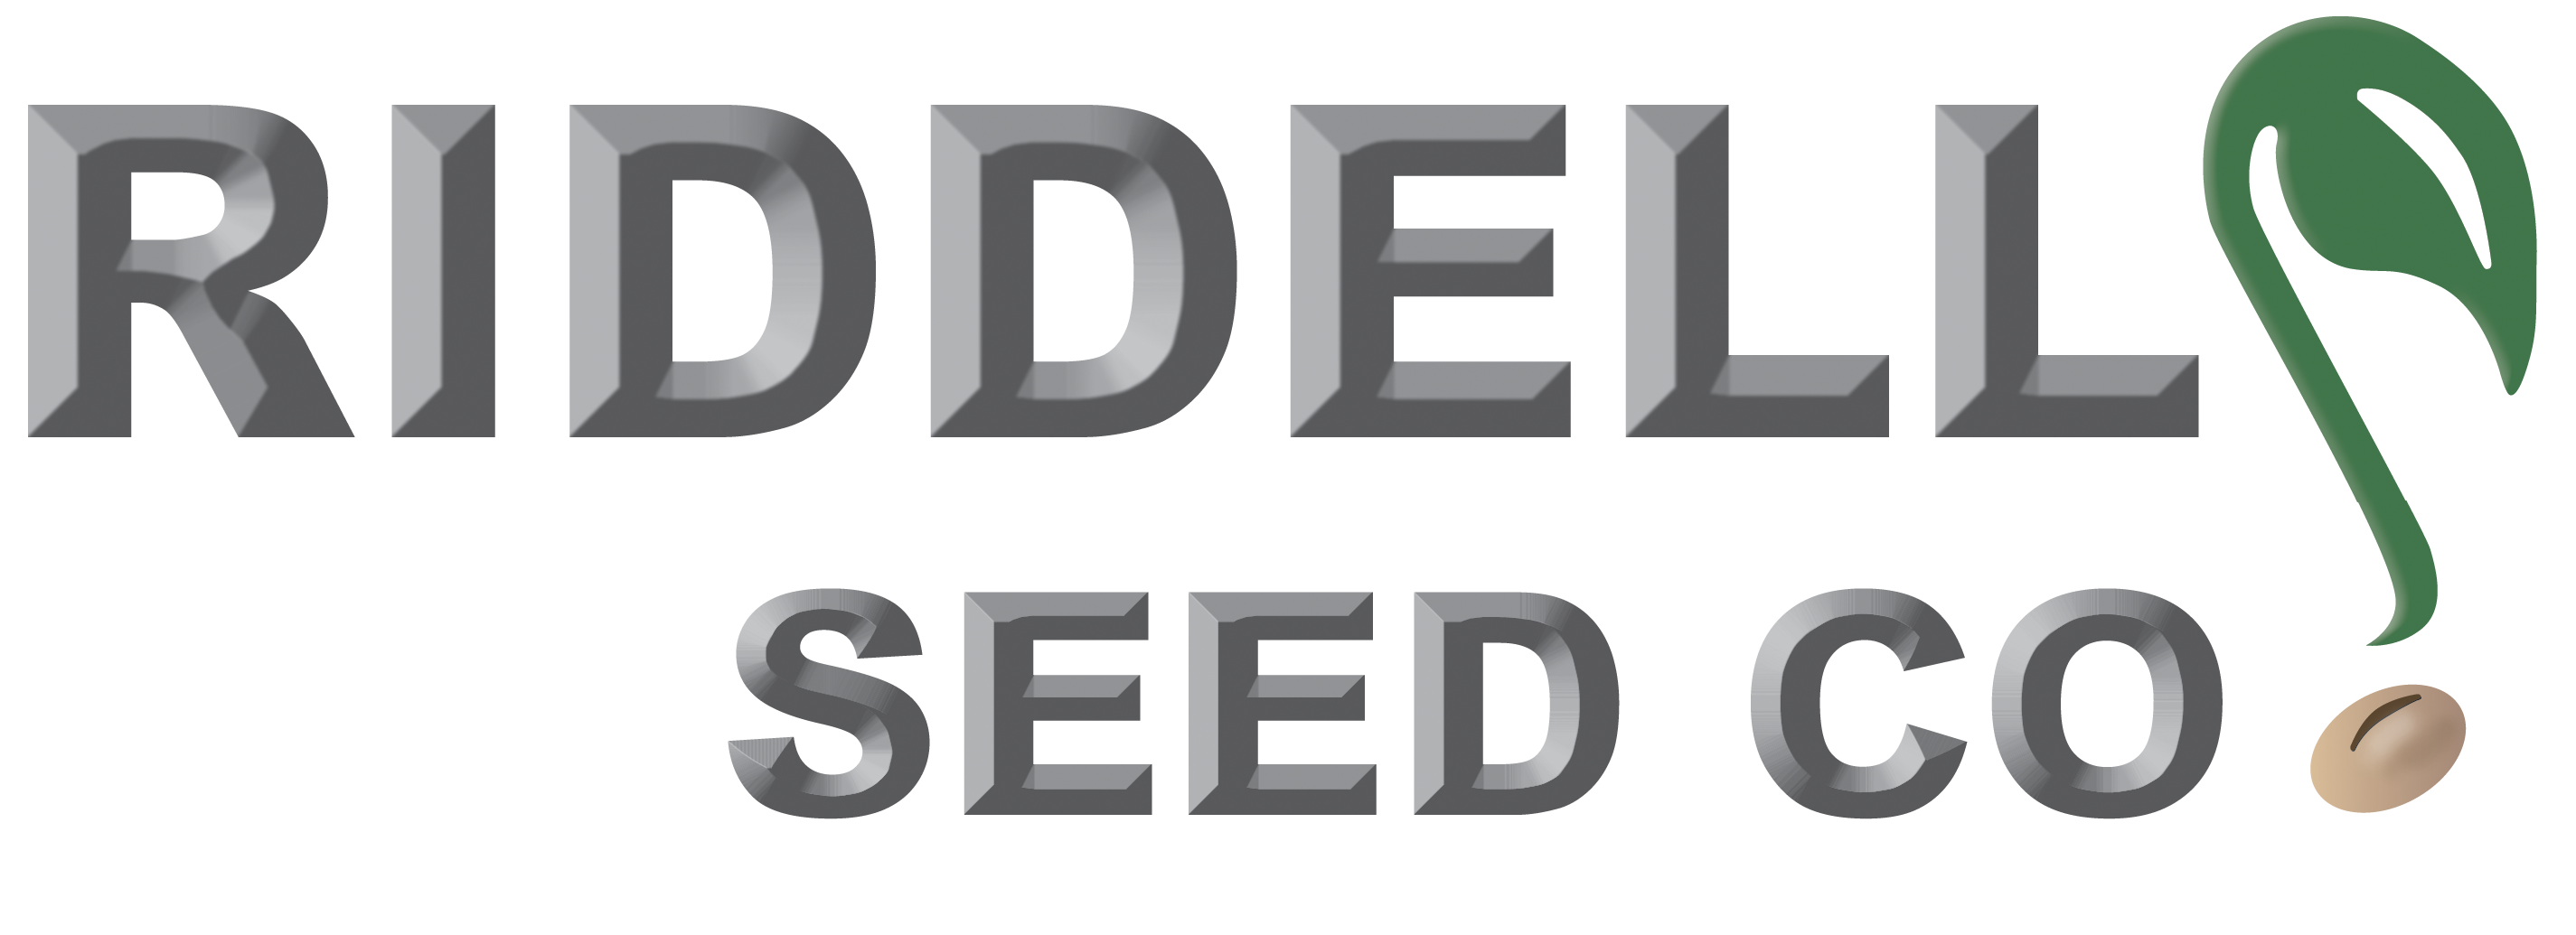 Riddell Seed Co.